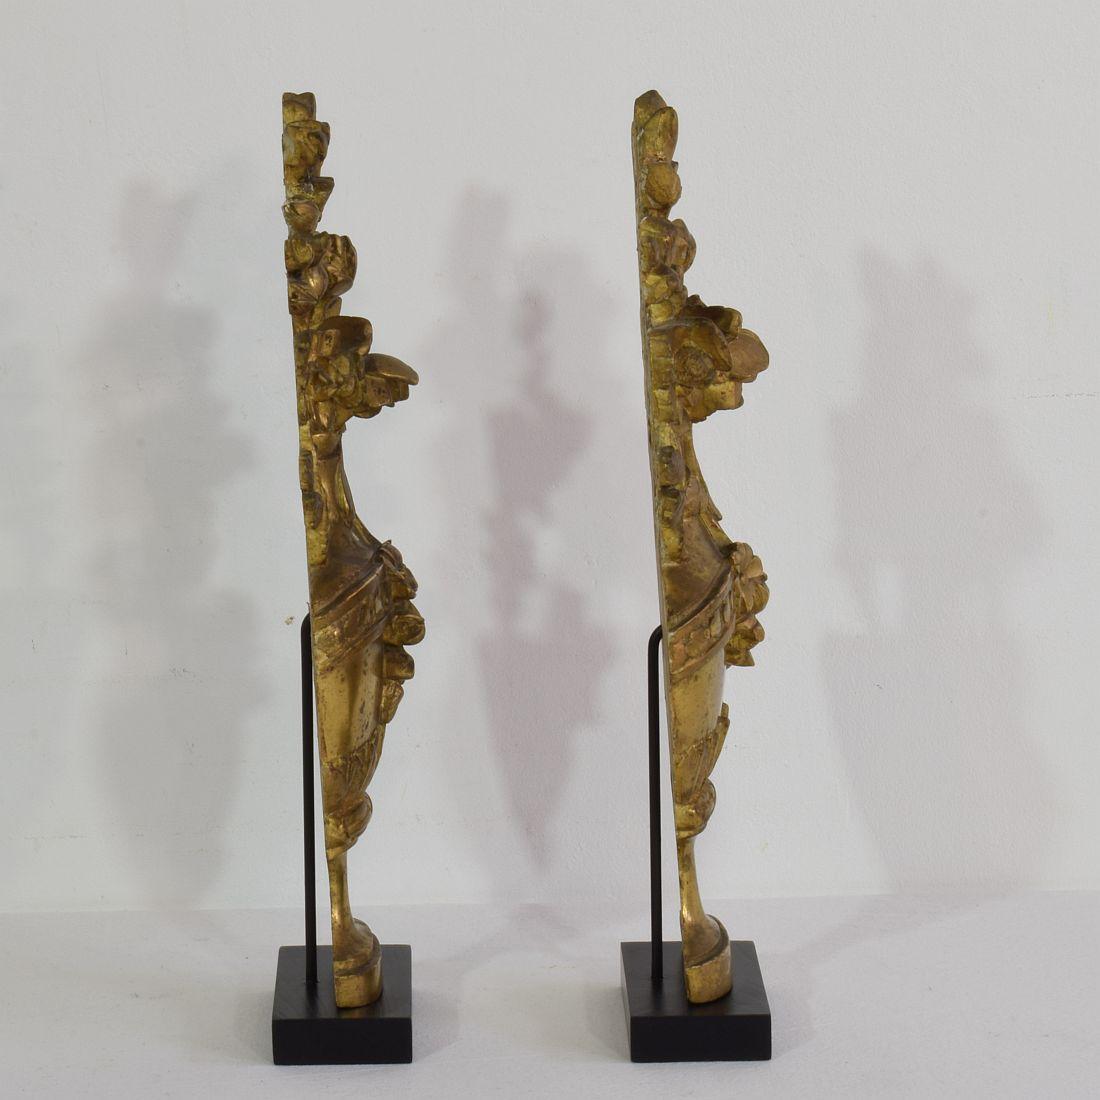 Wood Pair of Small 18-19th Century French Carved Giltwood Neoclassical Vase Ornaments